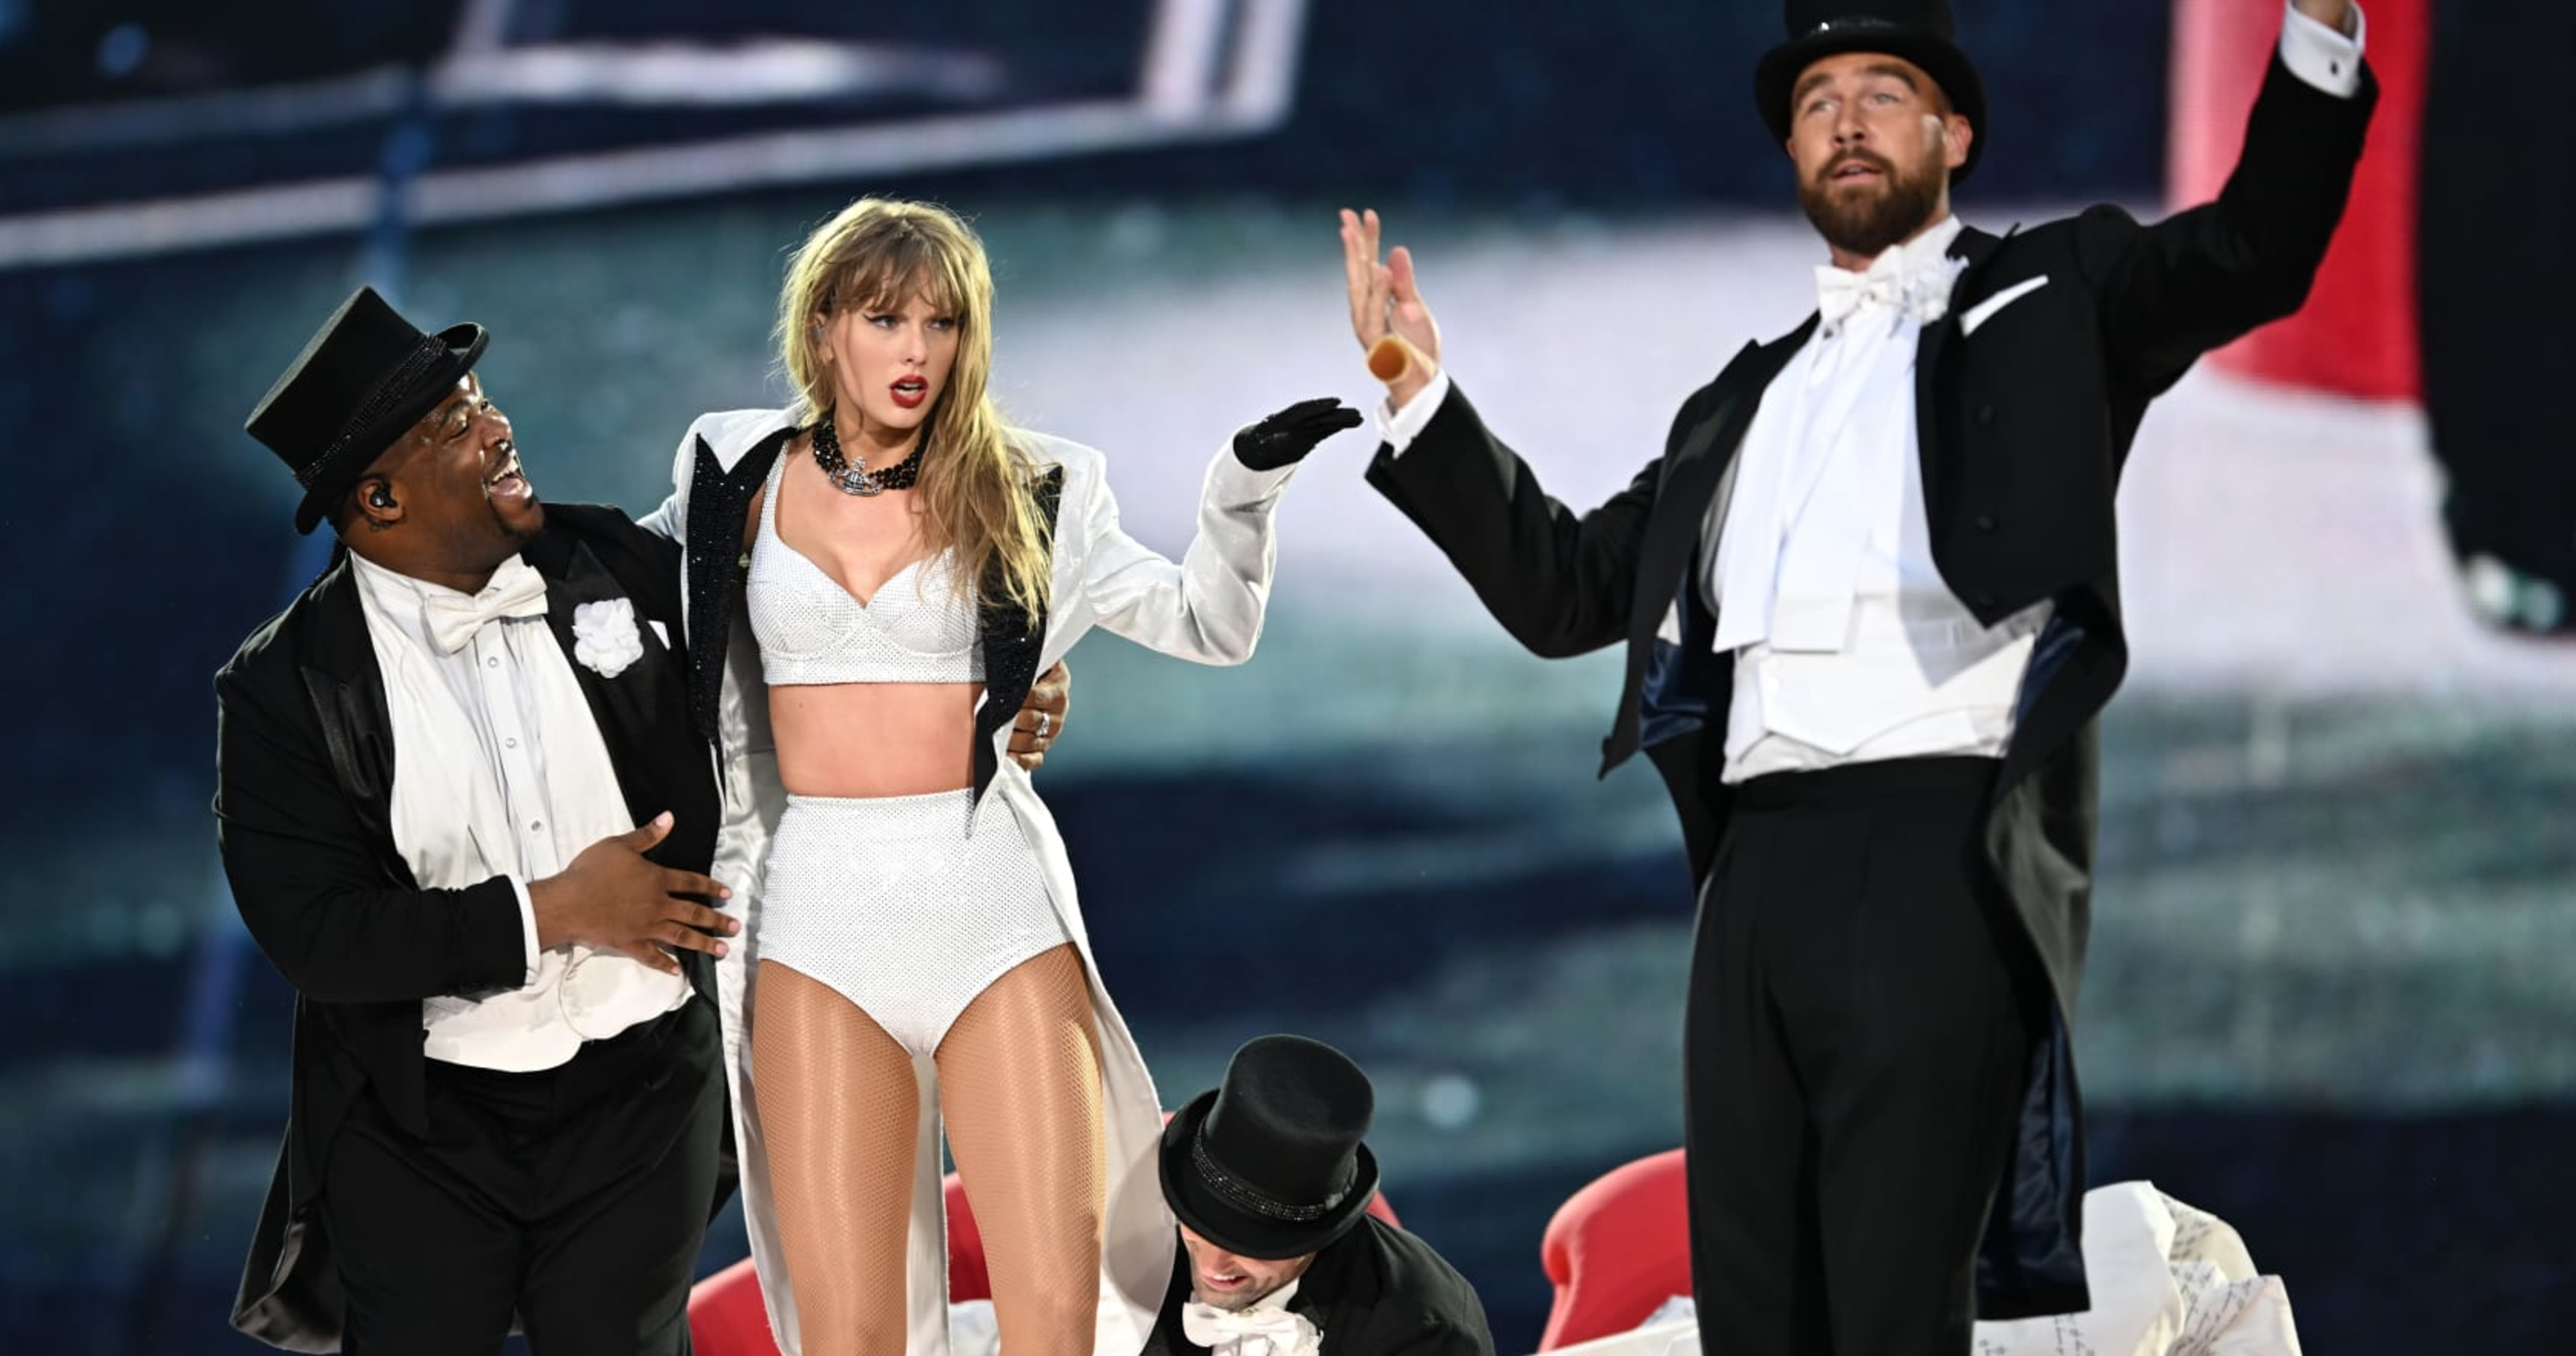 Video: Chiefs’ Andy Reid jokes Travis Kelce is the ‘Water Boy’ at Taylor Swift’s concerts | News, scores, highlights, stats and rumors